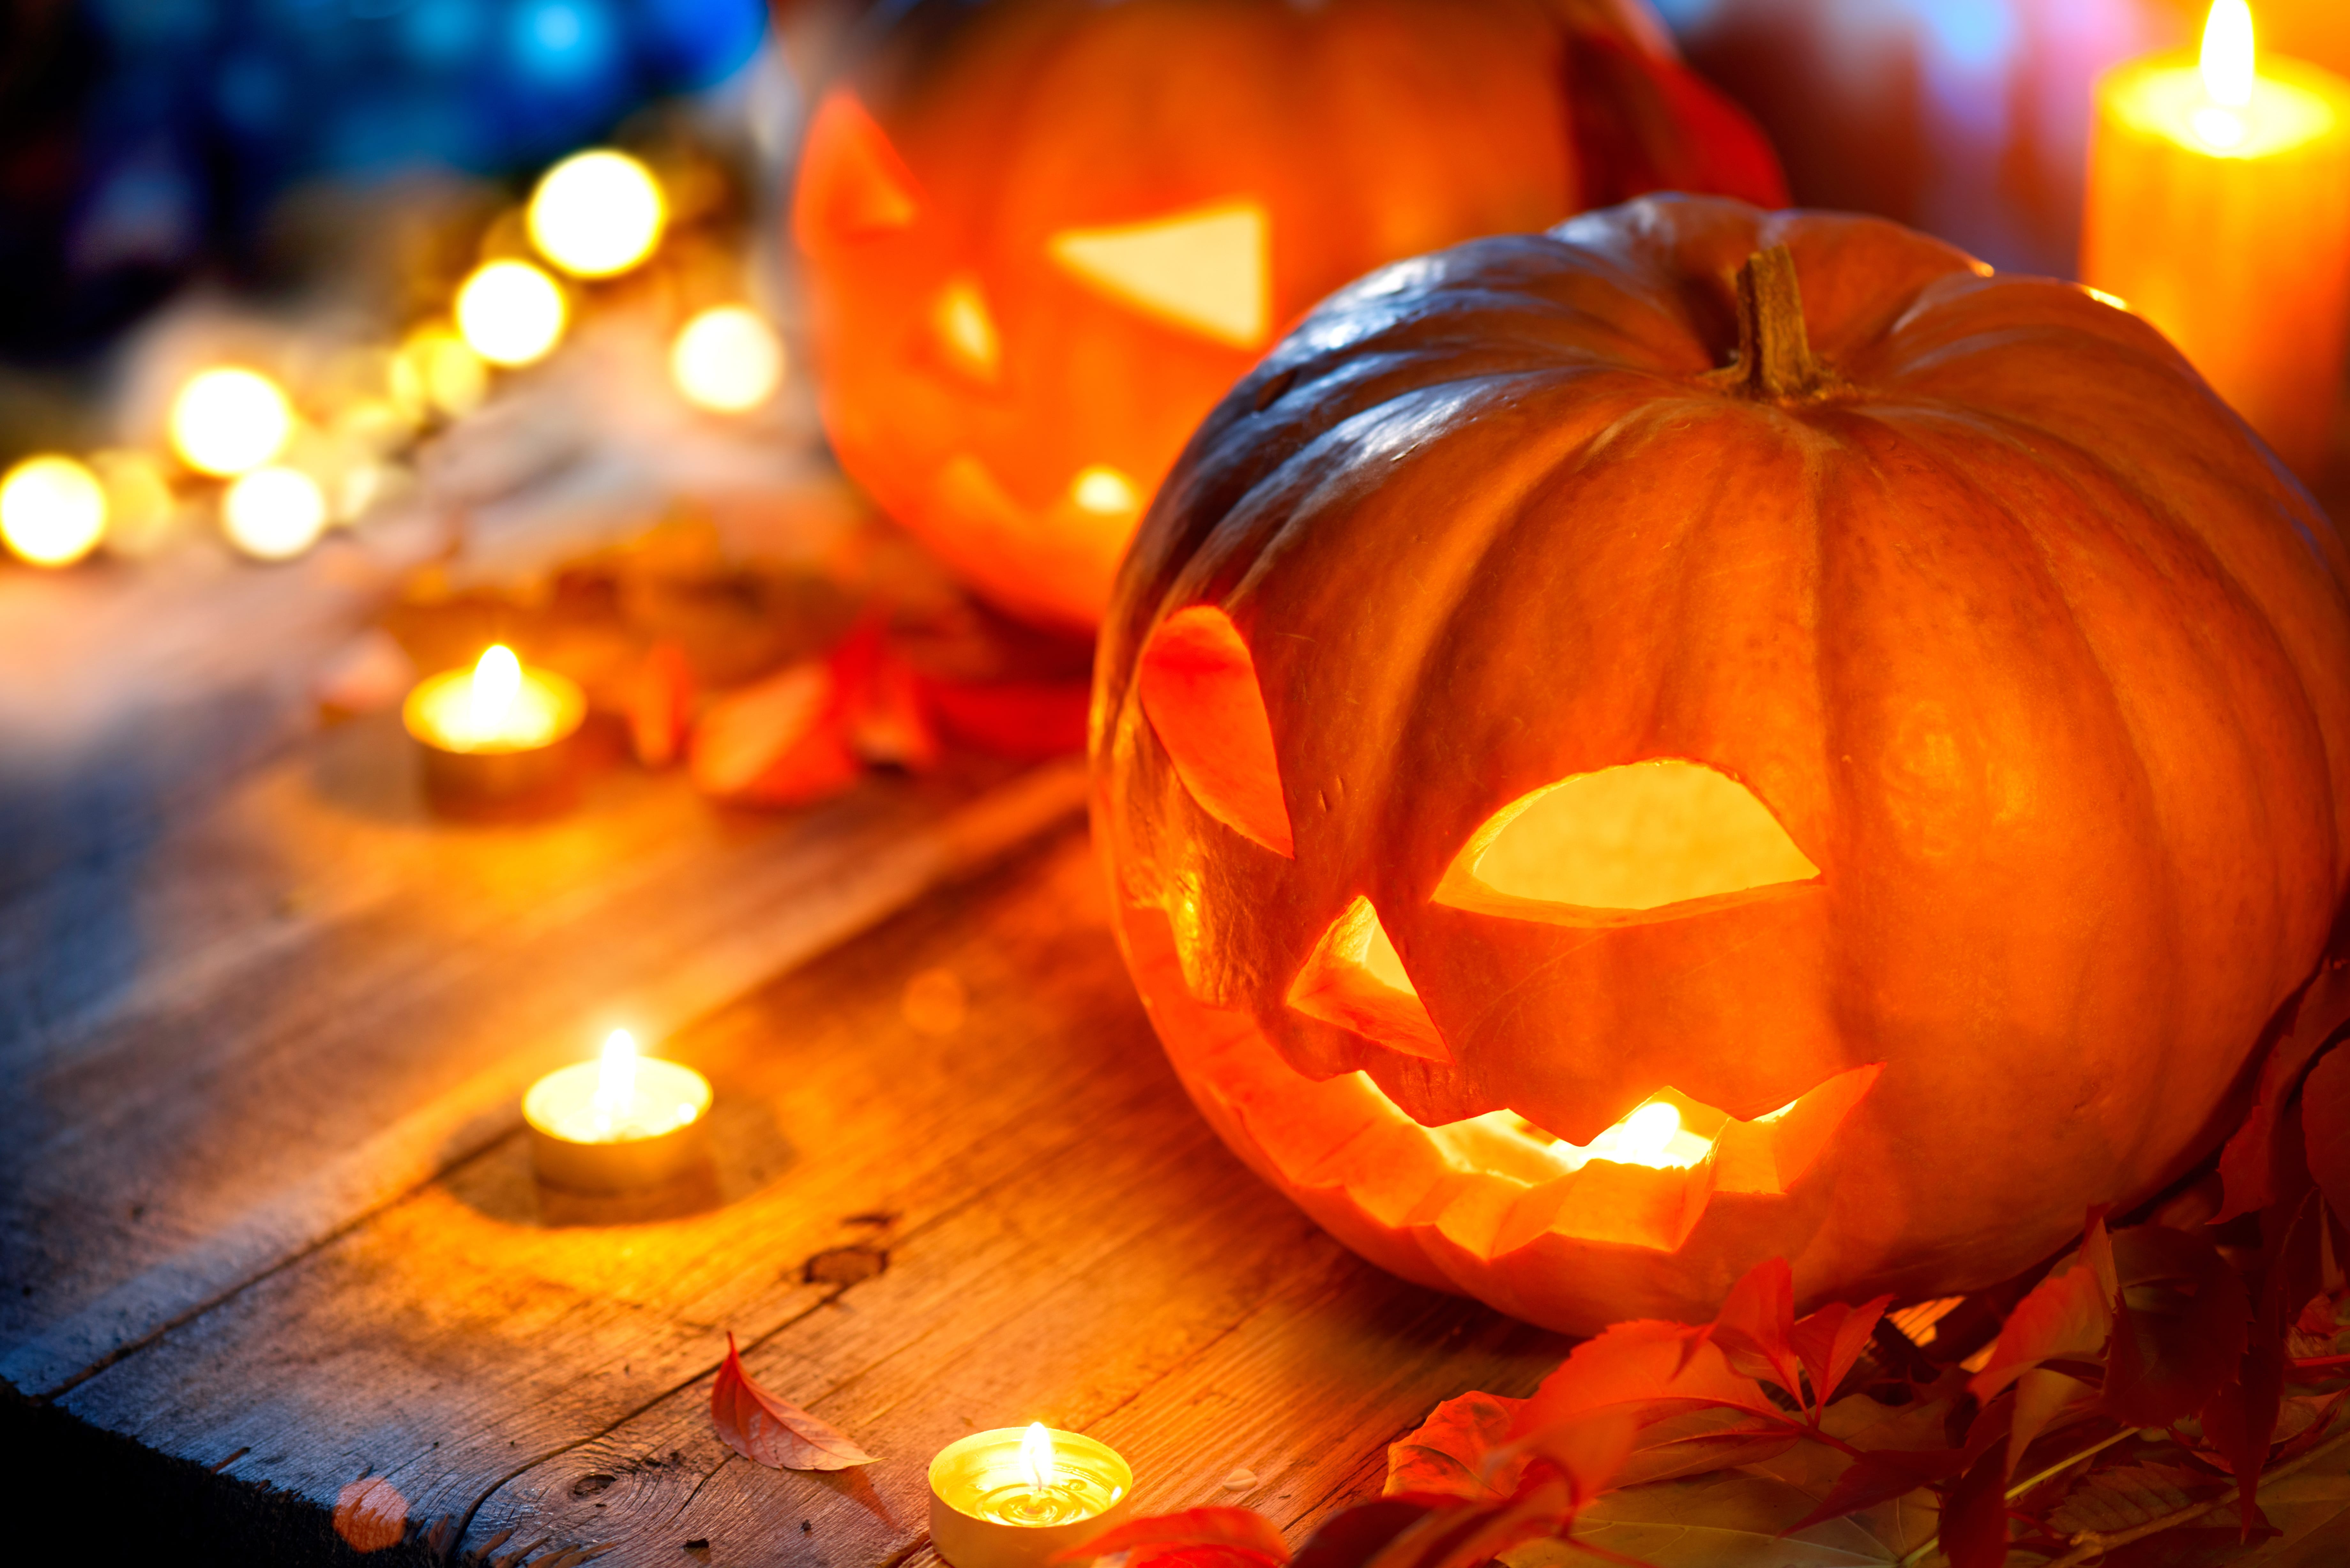 pumpkin carving ideas and safety tips - lake city homes for sale